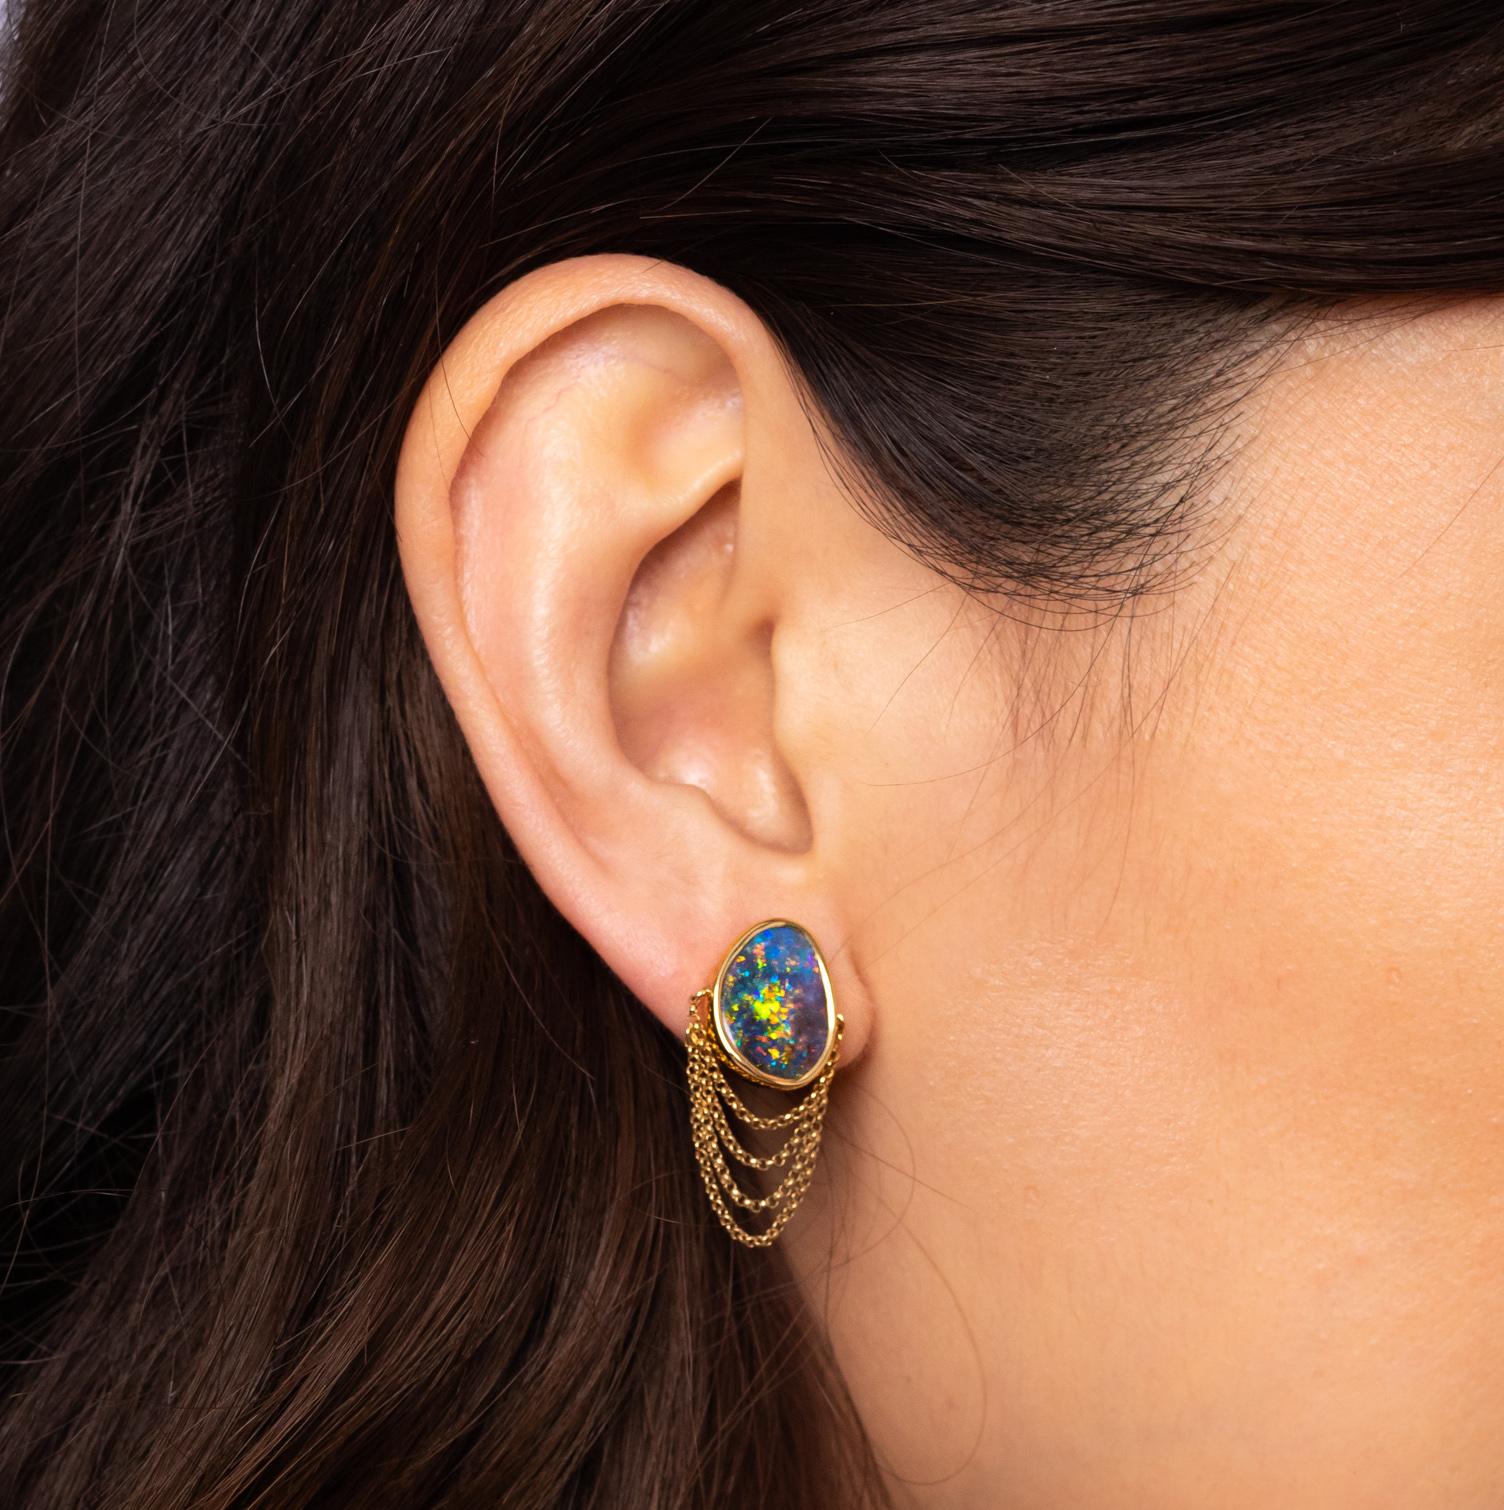 “La Vida Dulce” opal earrings seduce with vibrant colours and the alluring sway of delicate gold chains. Boulder opals (8.21ct) are set in 18K yellow gold – the host rock peeping through adds to the rawness of the piece and gives it an edge. A